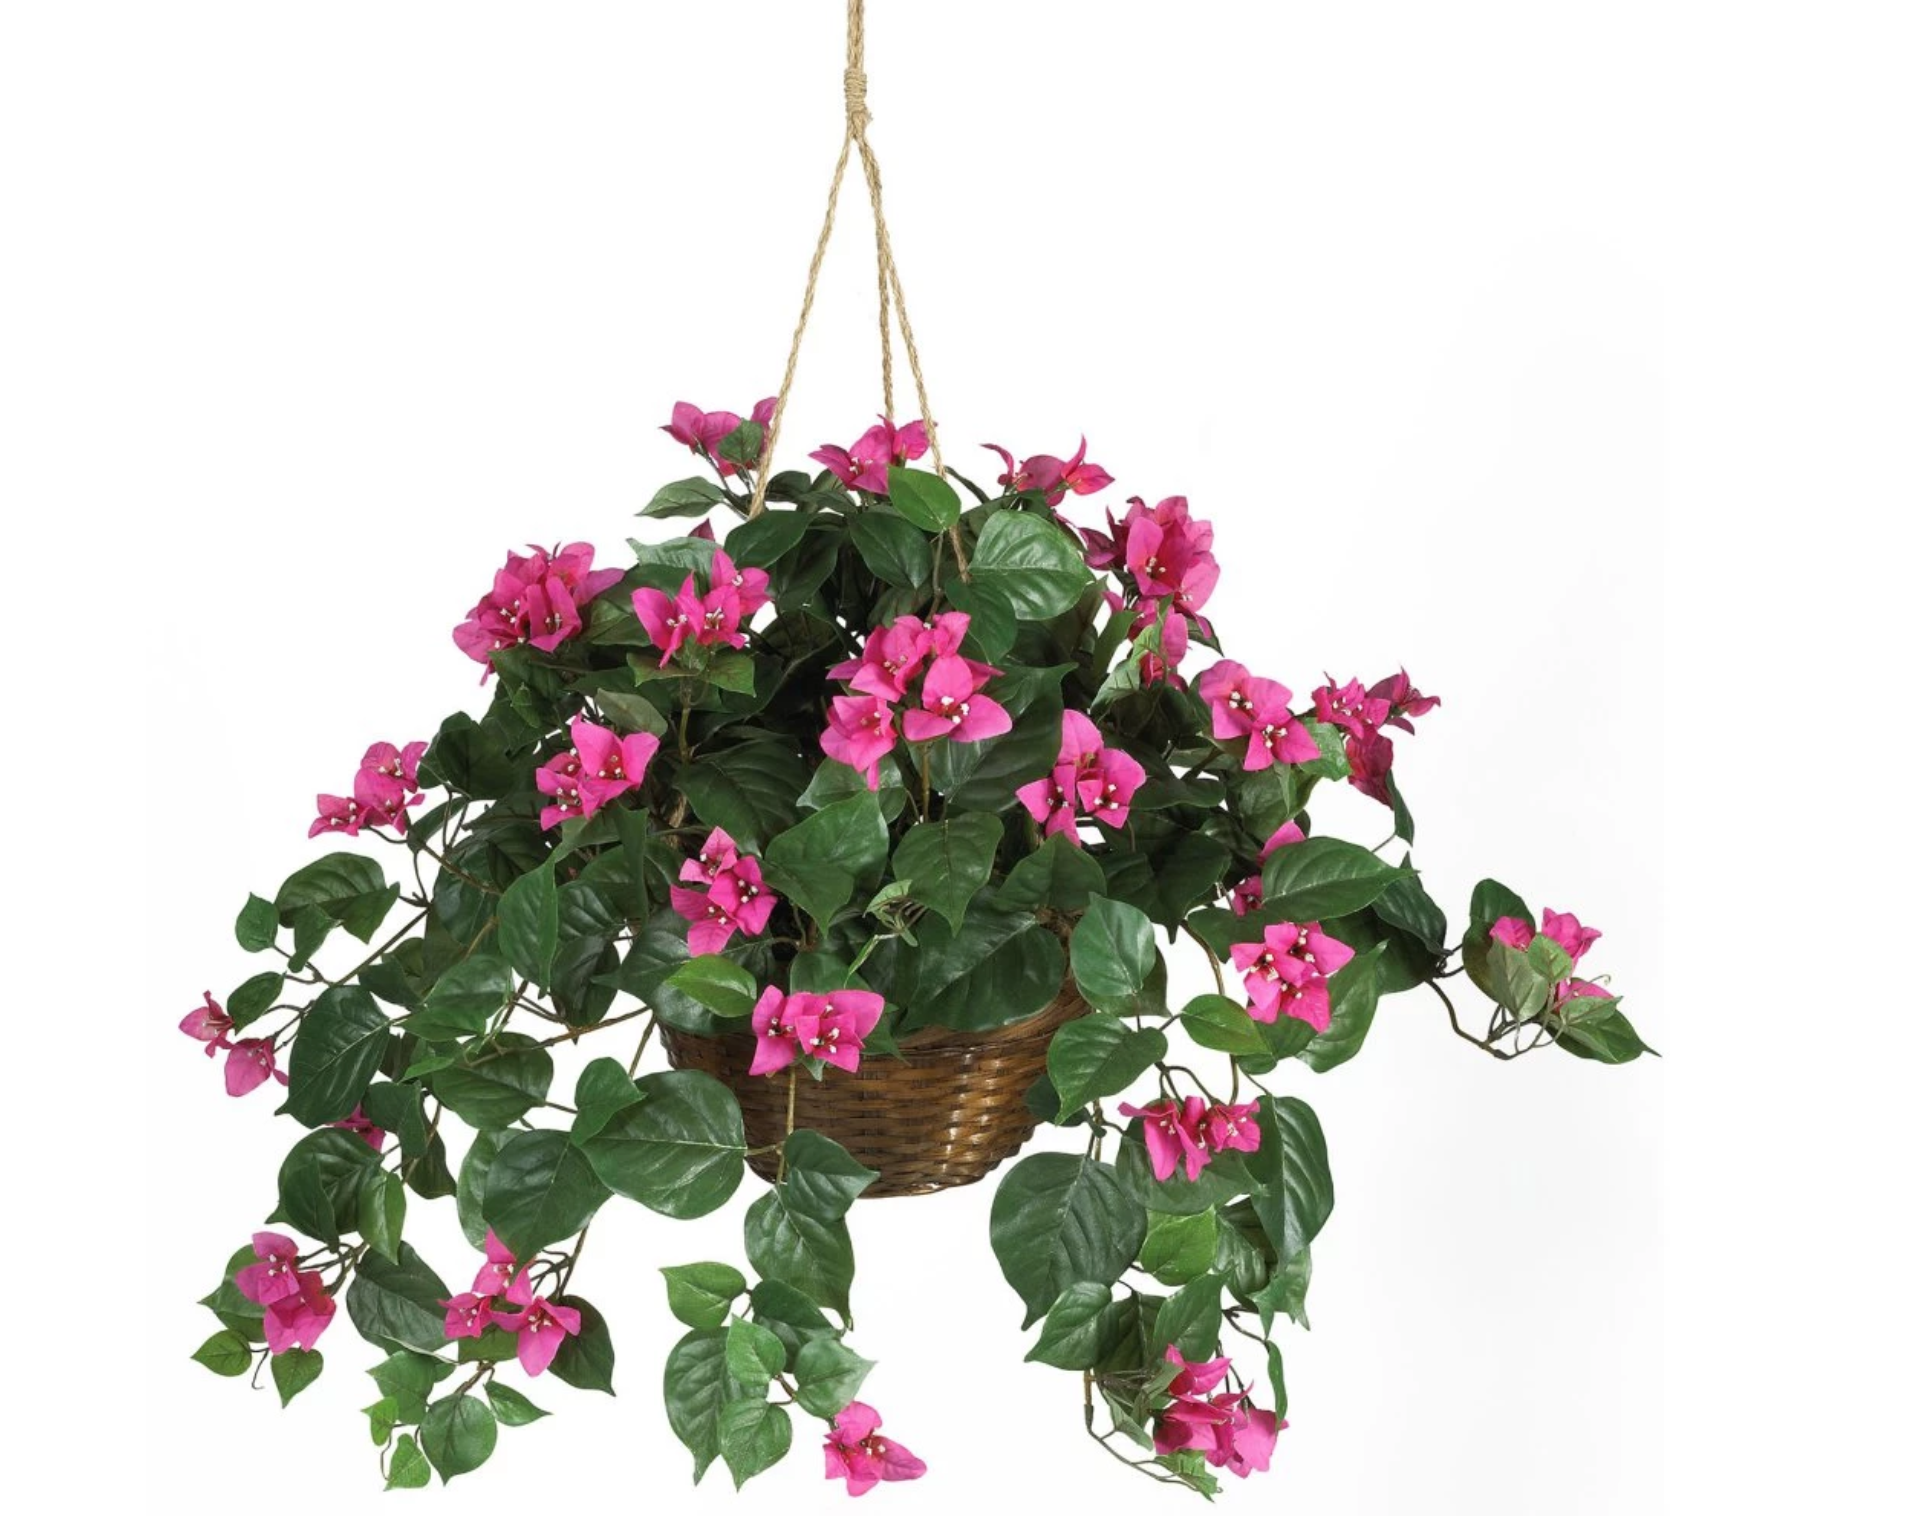 A green plant with pink flowers in a hanging planter.